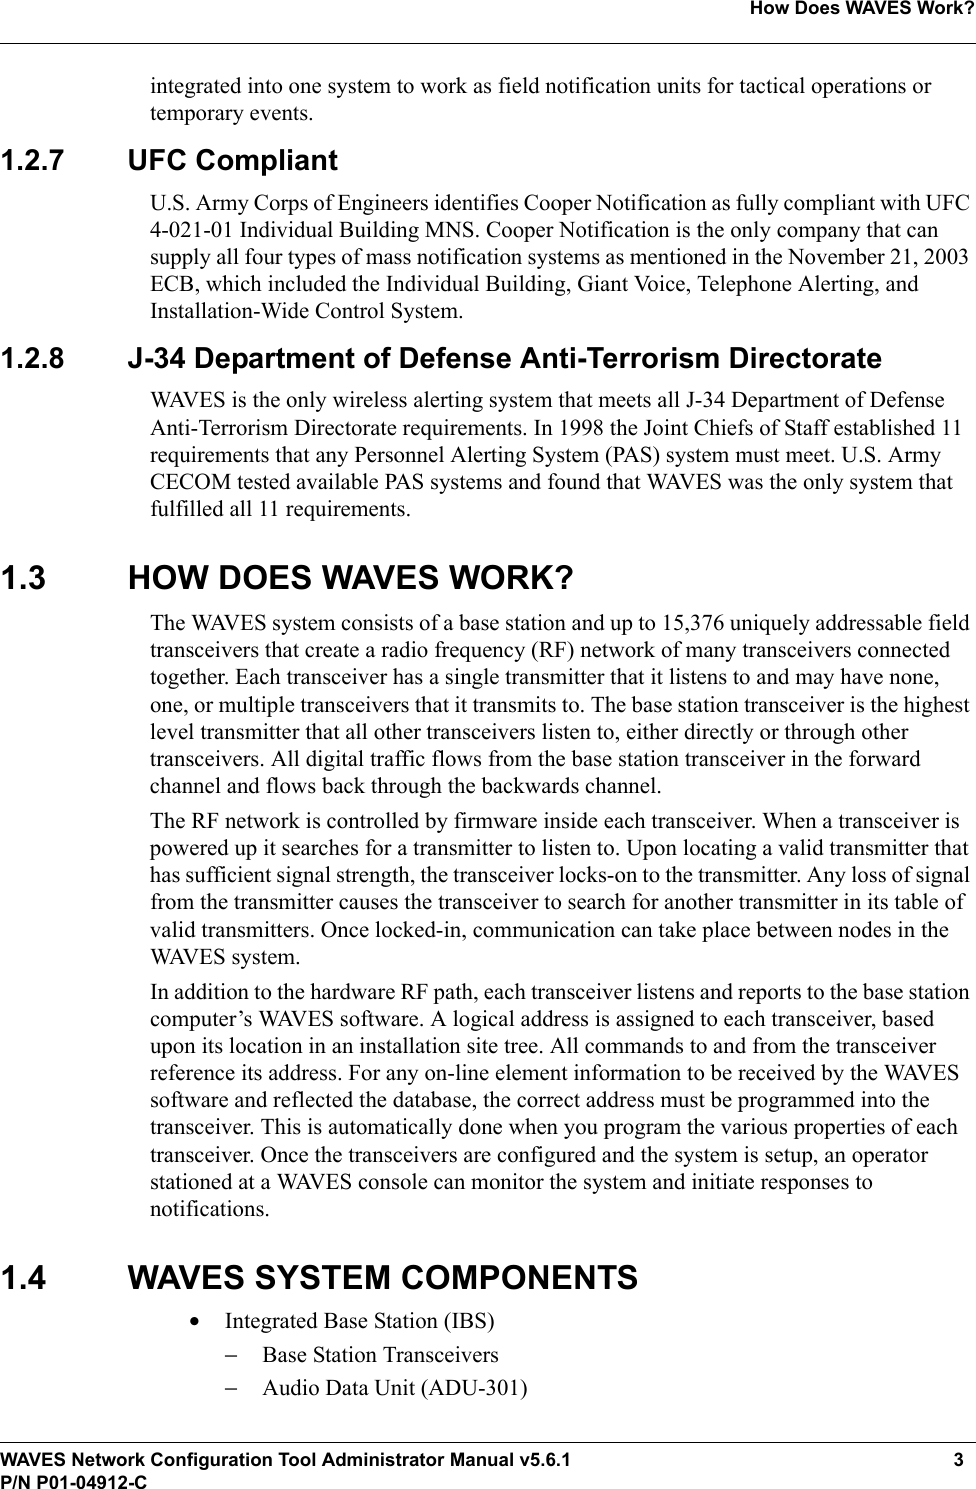 WAVES Network Configuration Tool Administrator Manual v5.6.1 3P/N P01-04912-CHow Does WAVES Work?integrated into one system to work as field notification units for tactical operations or temporary events.1.2.7 UFC CompliantU.S. Army Corps of Engineers identifies Cooper Notification as fully compliant with UFC 4-021-01 Individual Building MNS. Cooper Notification is the only company that can supply all four types of mass notification systems as mentioned in the November 21, 2003 ECB, which included the Individual Building, Giant Voice, Telephone Alerting, and Installation-Wide Control System. 1.2.8 J-34 Department of Defense Anti-Terrorism DirectorateWAVES is the only wireless alerting system that meets all J-34 Department of Defense Anti-Terrorism Directorate requirements. In 1998 the Joint Chiefs of Staff established 11 requirements that any Personnel Alerting System (PAS) system must meet. U.S. Army CECOM tested available PAS systems and found that WAVES was the only system that fulfilled all 11 requirements.1.3 HOW DOES WAVES WORK?The WAVES system consists of a base station and up to 15,376 uniquely addressable field transceivers that create a radio frequency (RF) network of many transceivers connected together. Each transceiver has a single transmitter that it listens to and may have none, one, or multiple transceivers that it transmits to. The base station transceiver is the highest level transmitter that all other transceivers listen to, either directly or through other transceivers. All digital traffic flows from the base station transceiver in the forward channel and flows back through the backwards channel. The RF network is controlled by firmware inside each transceiver. When a transceiver is powered up it searches for a transmitter to listen to. Upon locating a valid transmitter that has sufficient signal strength, the transceiver locks-on to the transmitter. Any loss of signal from the transmitter causes the transceiver to search for another transmitter in its table of valid transmitters. Once locked-in, communication can take place between nodes in the WAVES system. In addition to the hardware RF path, each transceiver listens and reports to the base station computer’s WAVES software. A logical address is assigned to each transceiver, based upon its location in an installation site tree. All commands to and from the transceiver reference its address. For any on-line element information to be received by the WAVES software and reflected the database, the correct address must be programmed into the transceiver. This is automatically done when you program the various properties of each transceiver. Once the transceivers are configured and the system is setup, an operator stationed at a WAVES console can monitor the system and initiate responses to notifications. 1.4 WAVES SYSTEM COMPONENTS•Integrated Base Station (IBS)−Base Station Transceivers−Audio Data Unit (ADU-301)